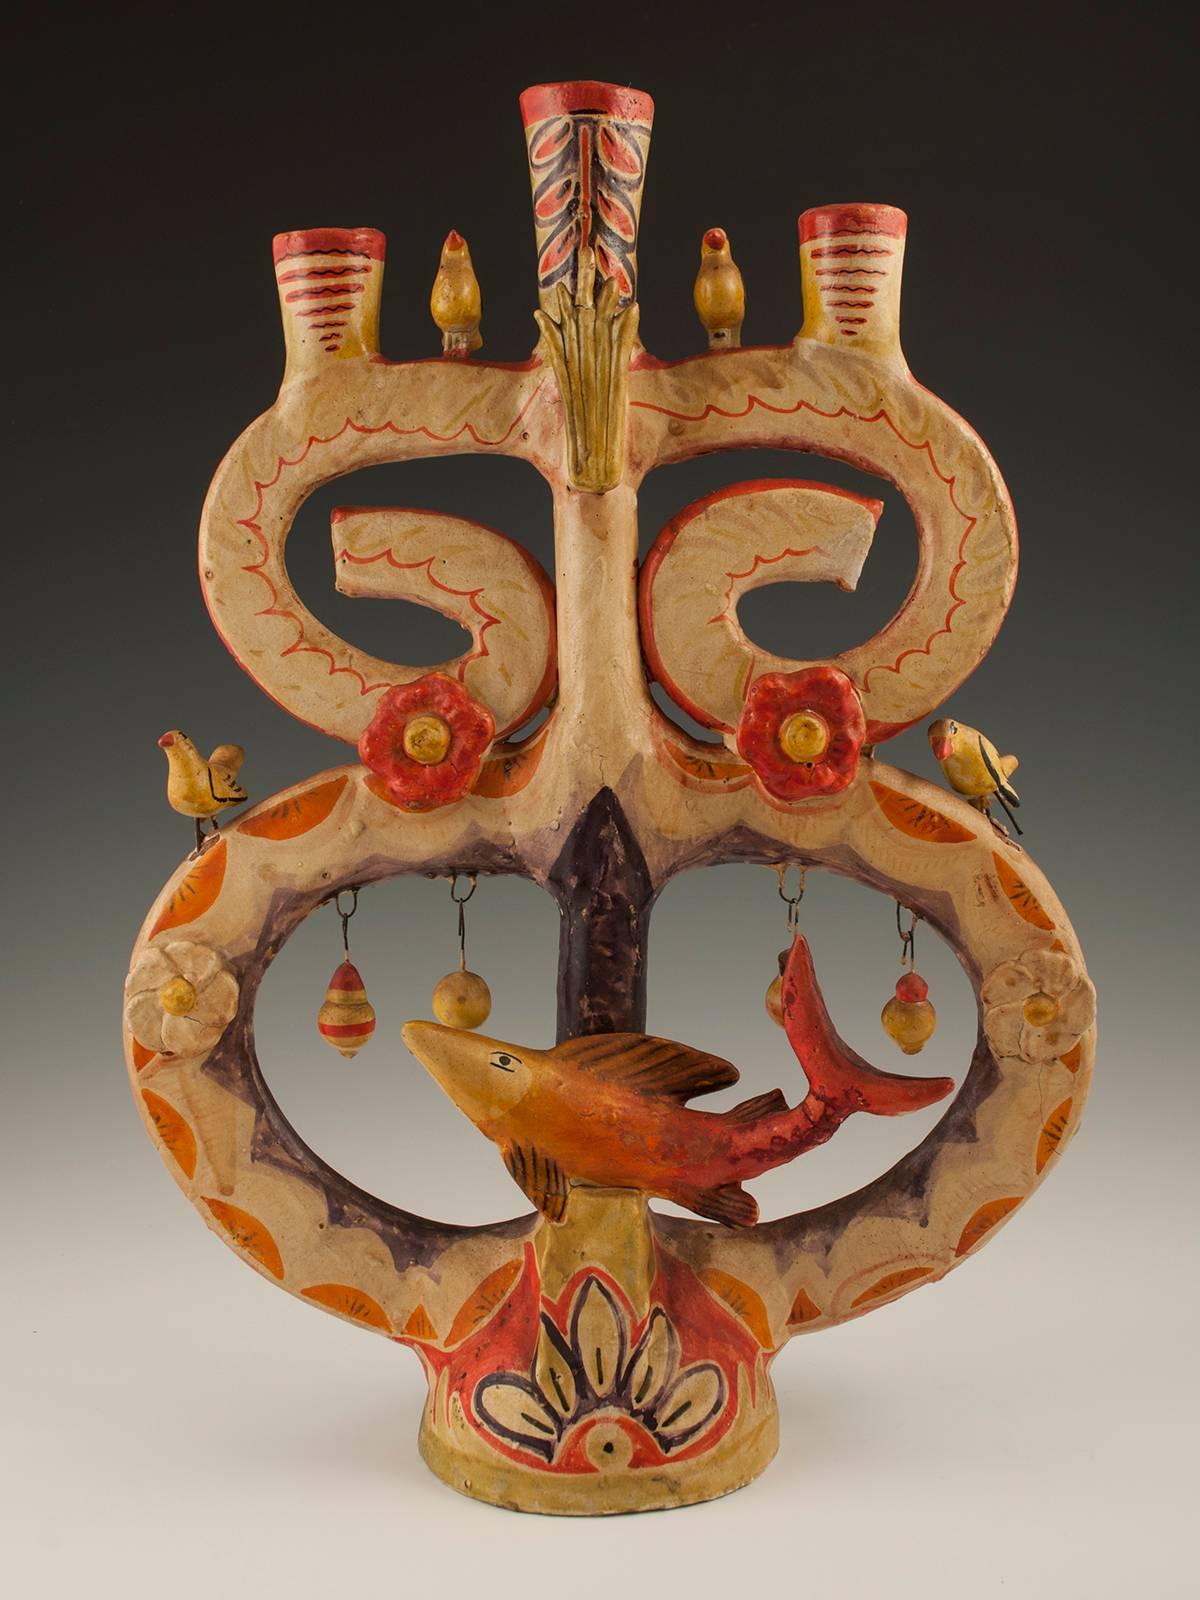 Mid-century Folk Art Candelabra by Aurelio Flores, Izucar de Matamoros, Mexico 

A candelabra featuring a large fish, birds, flowers and dangling ornaments. The fish's tail has been repaired, as has the center bit of the flame near the top,